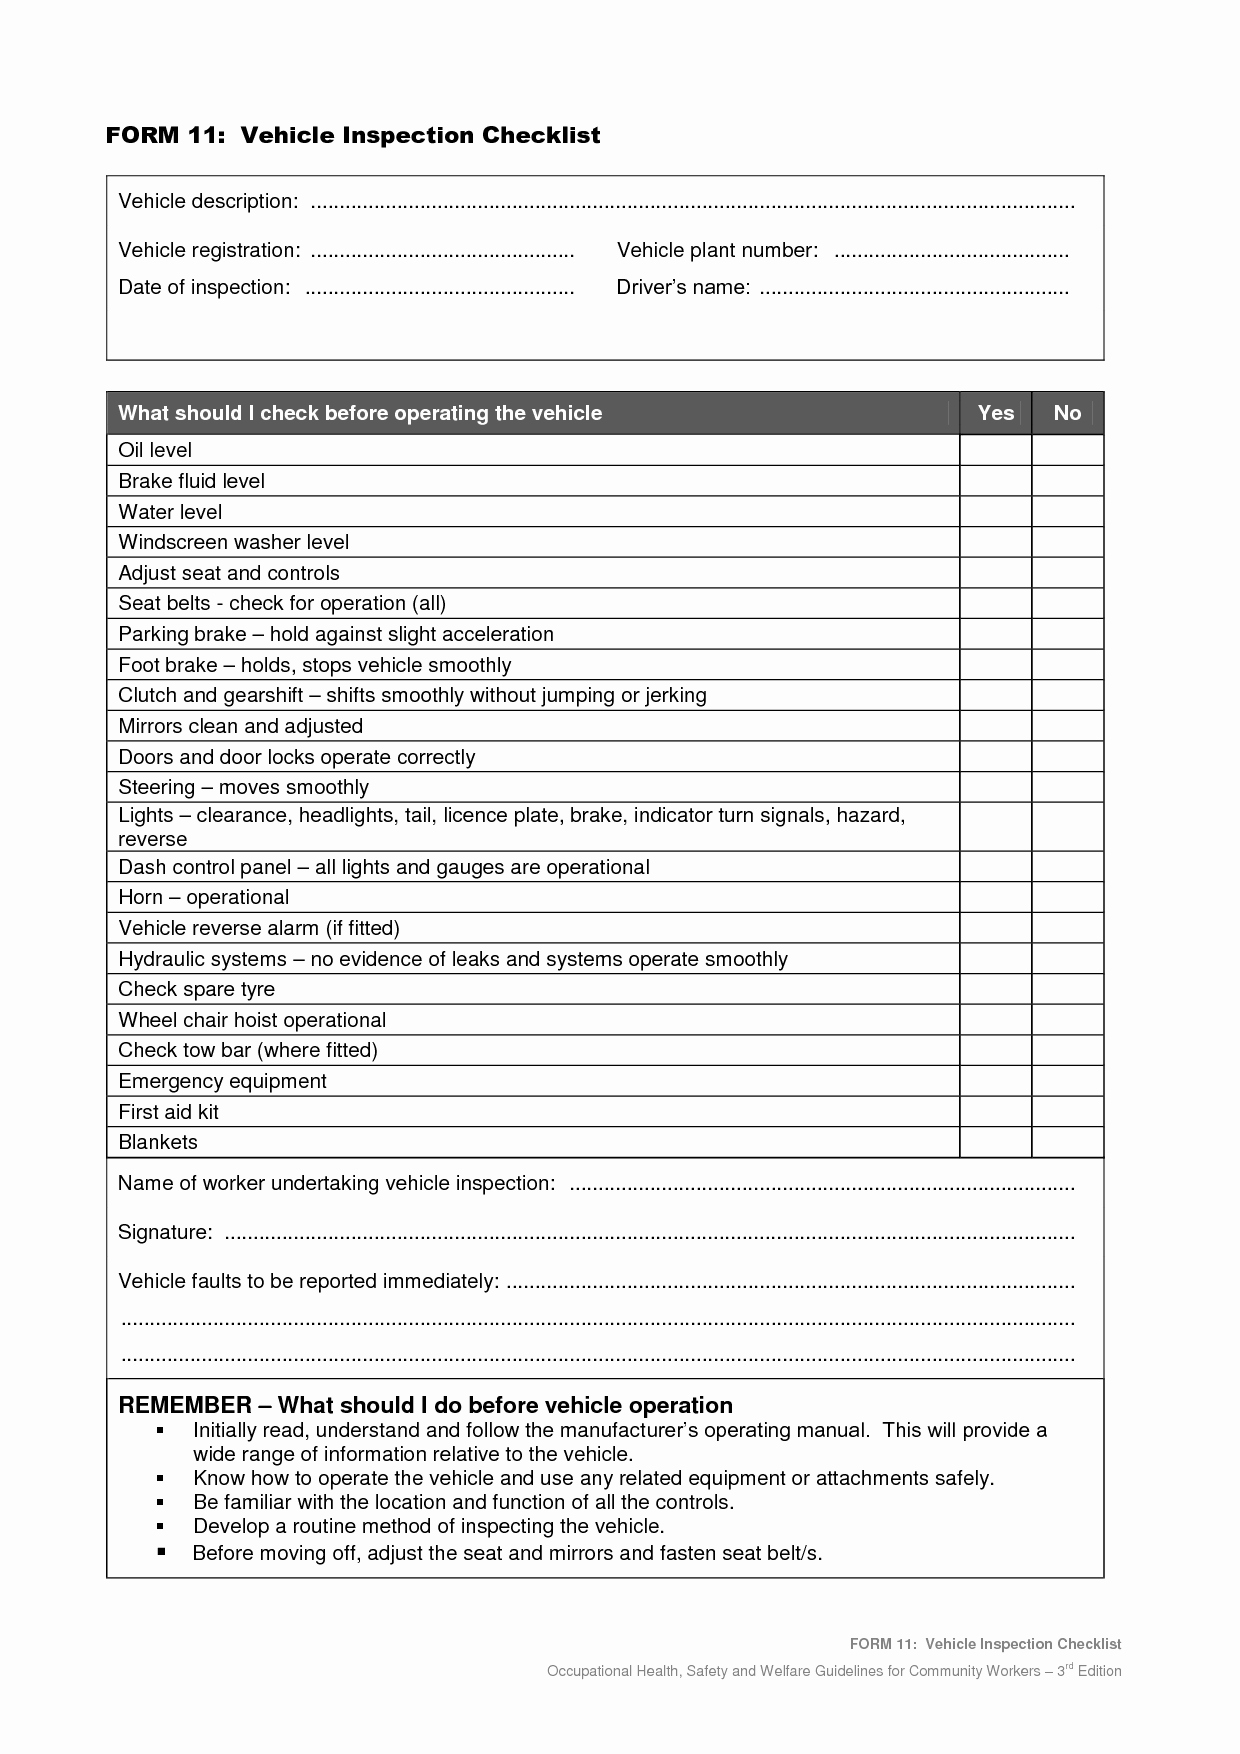 Vehicle Safety Inspection Checklist form